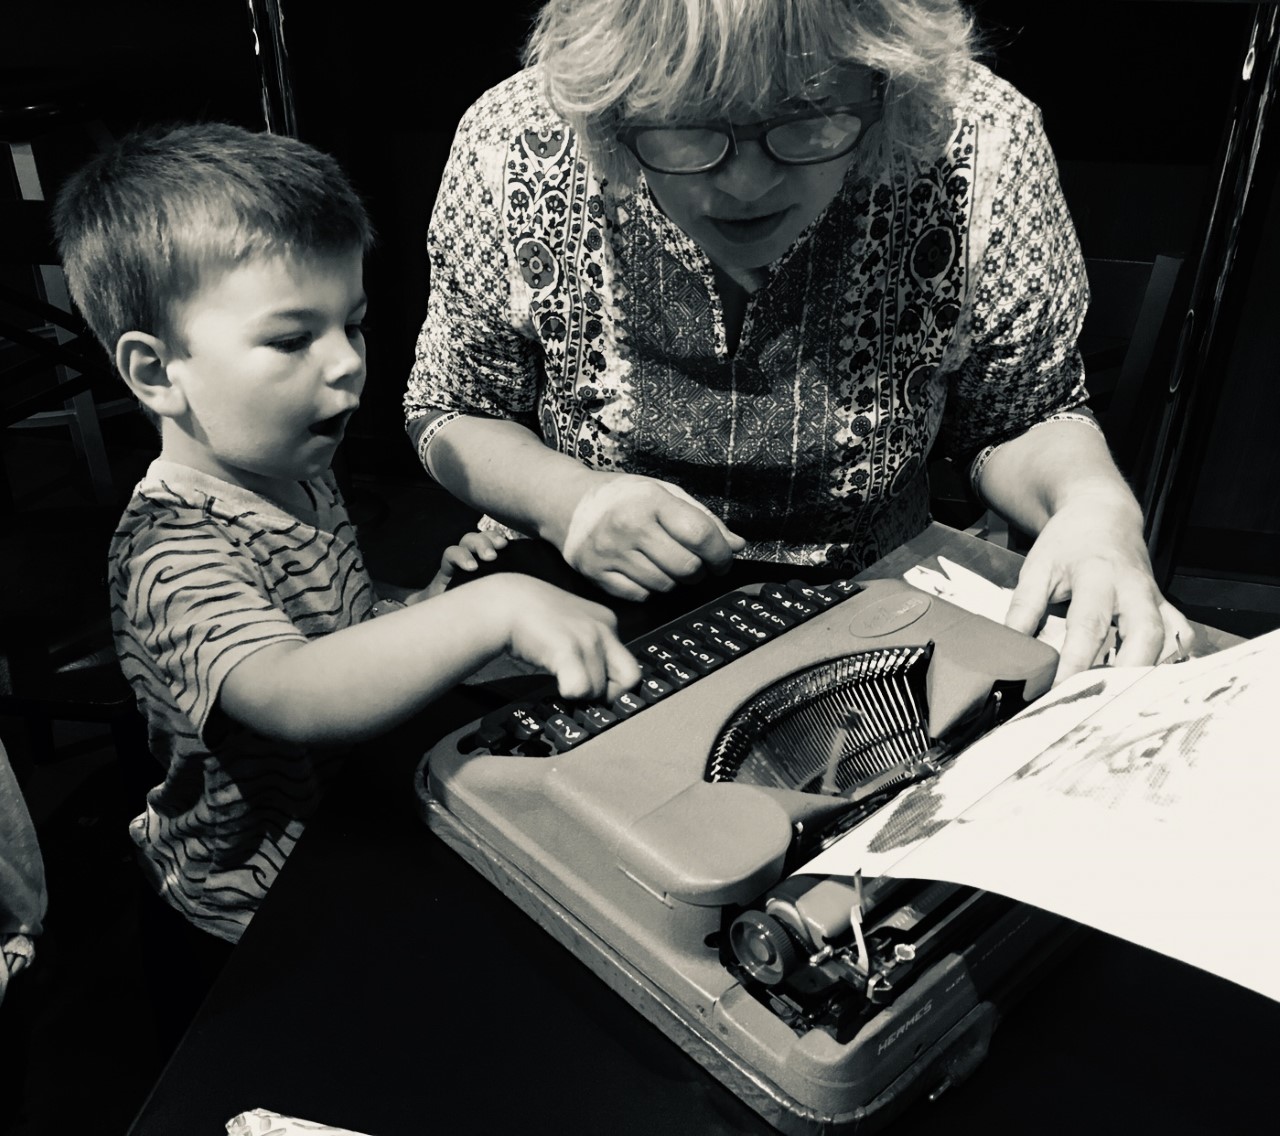 Kelye Kneeland shares her typewriter with a young boy